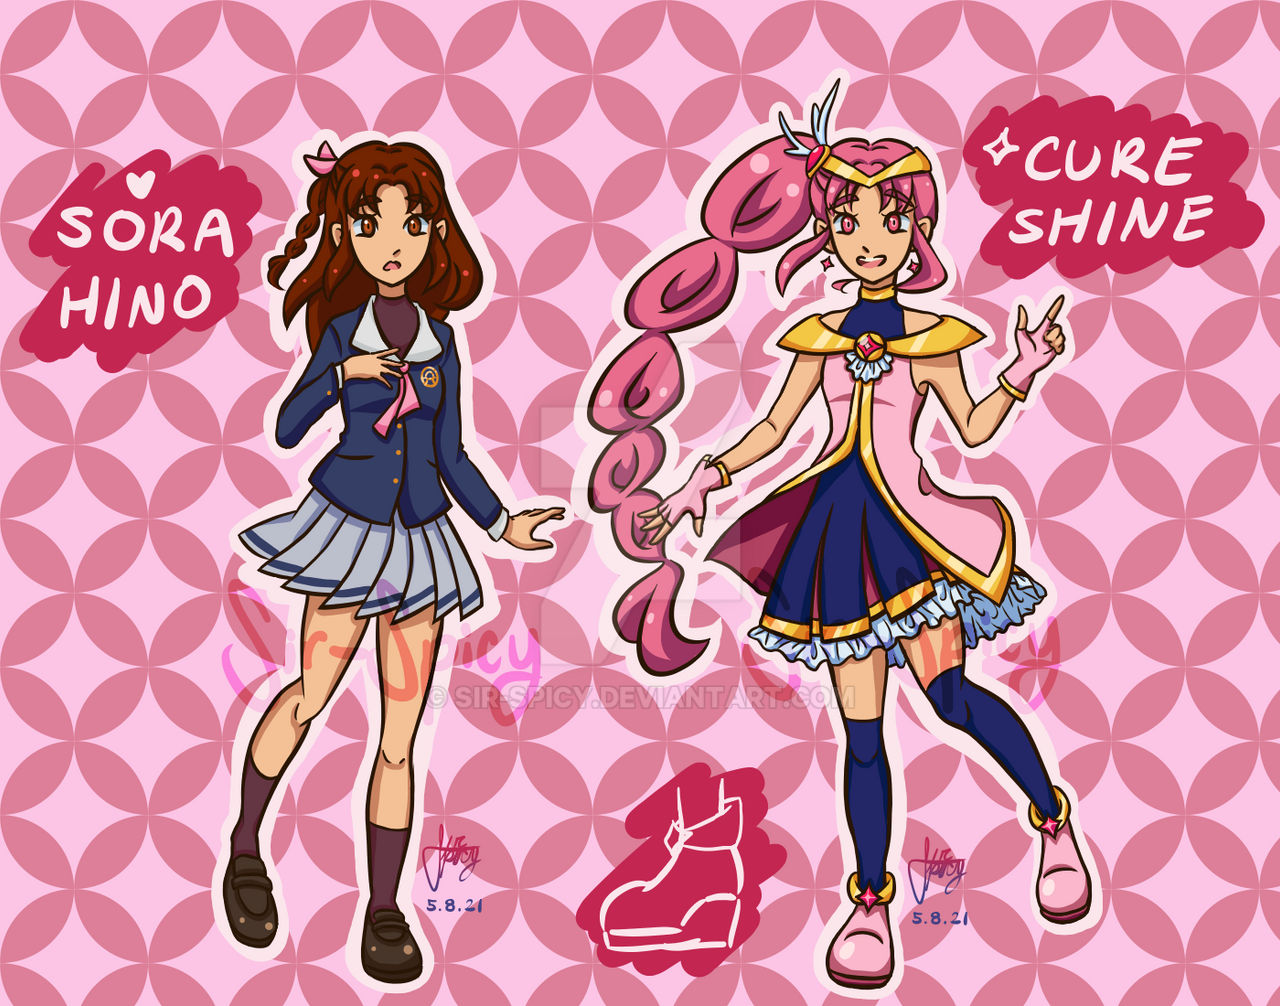 Justice PreCure - Cure Shine [OC] by Sir-Spicy on DeviantArt